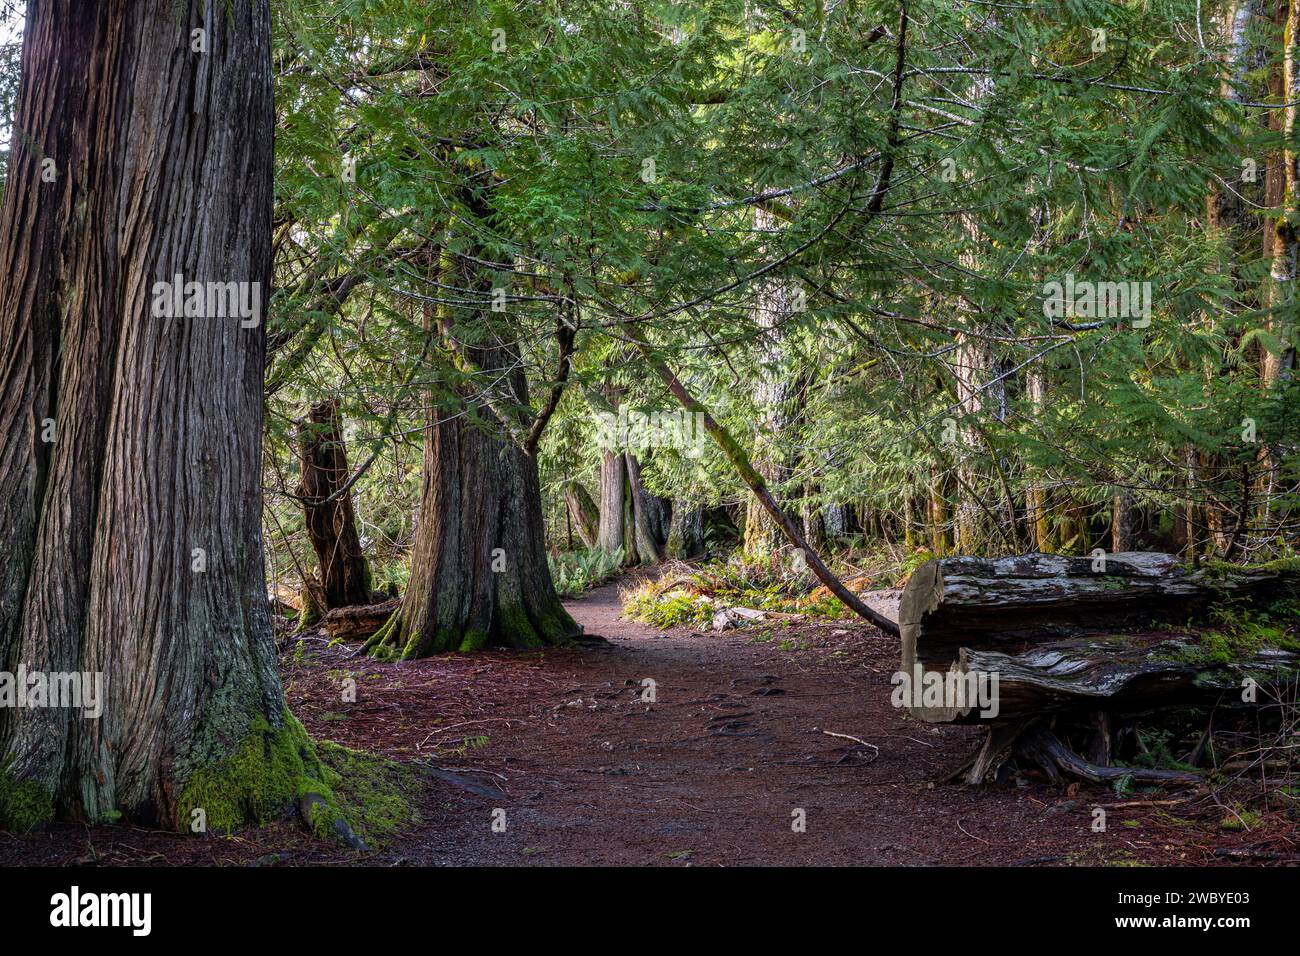 WA23915-00...WASHINGTON - Old growth forest along the shore of Lake Crescent viewed from the Moments in Time Trail. Stock Photo